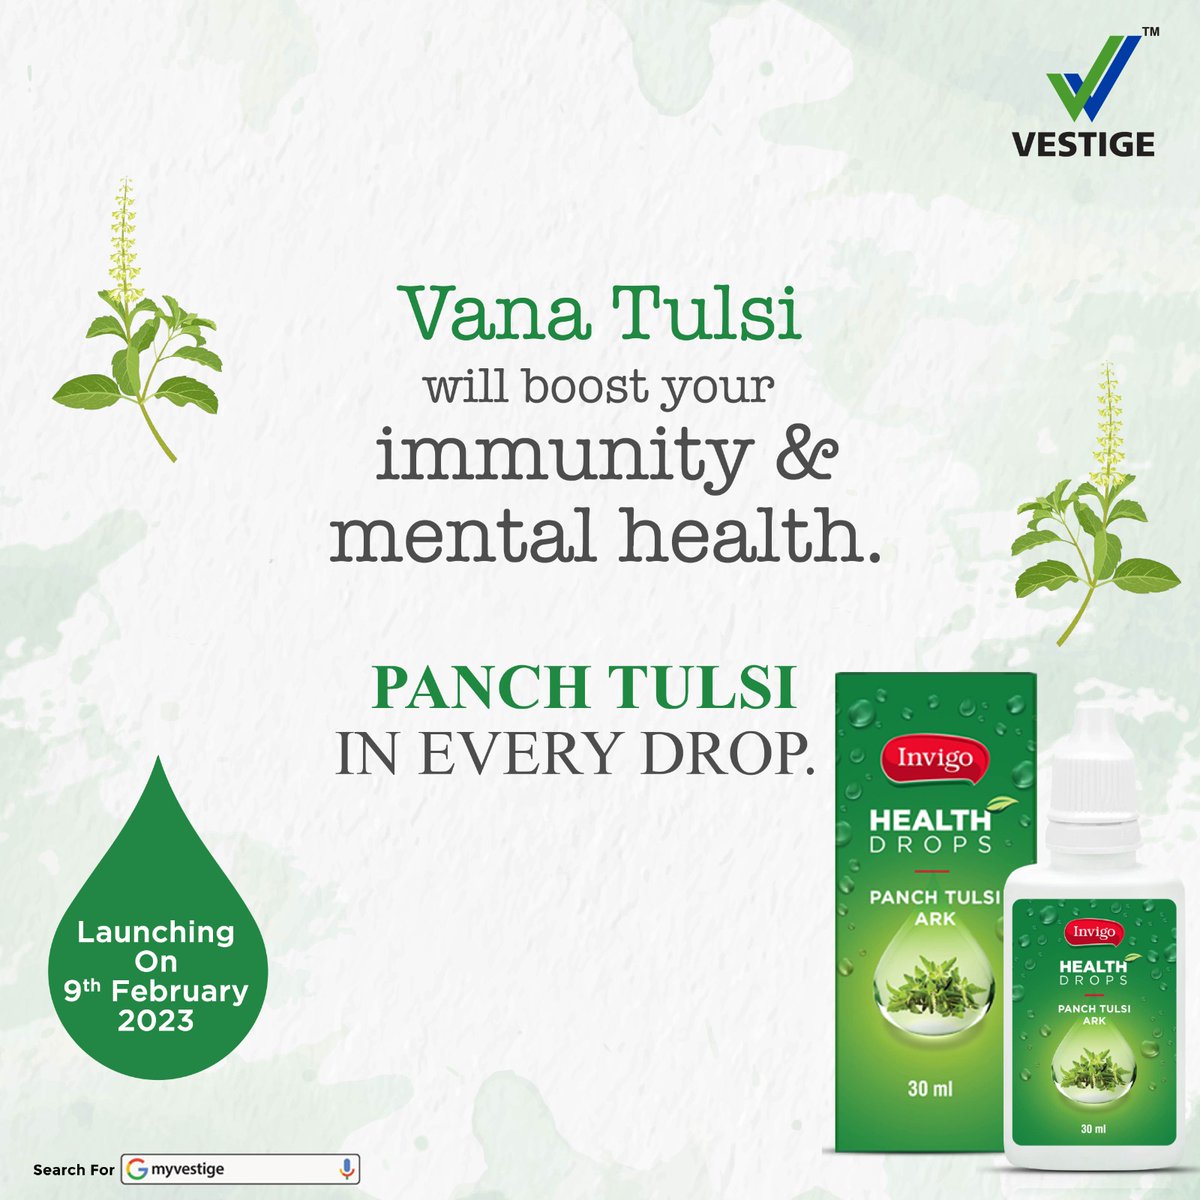 Increase your immunity and improve your mental health with all the goodness in a single drop of Panch Tulsi Ark.Launching on 9th February 2023.

#WishYouWellth #panchtulsiark #tulsidrop #invigo #comingsoon